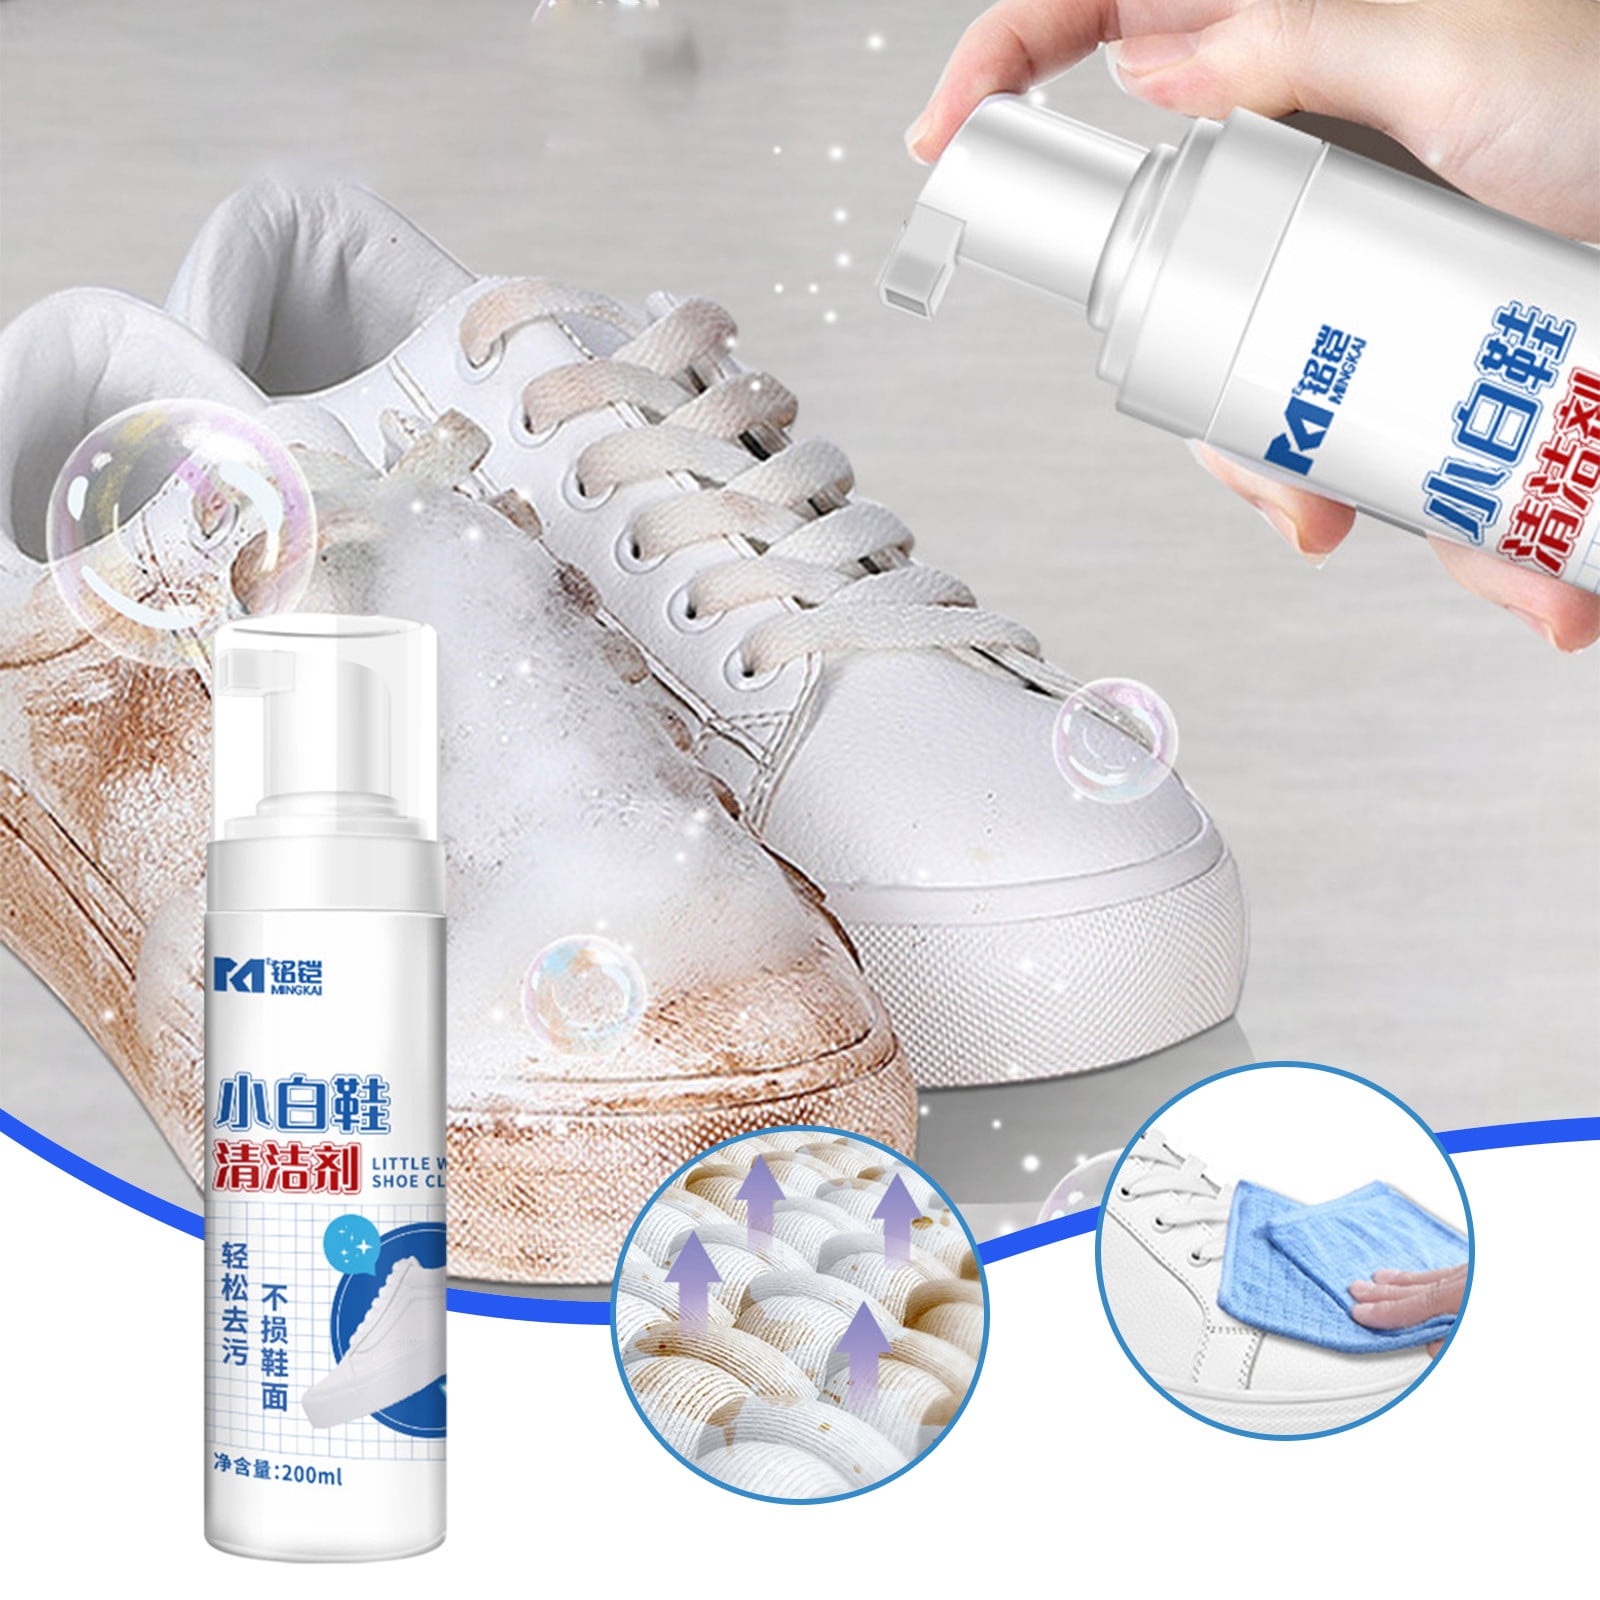 SHENGXINY Shoe Cleaner Clearance Anhydrous Cleaning Cream for Small White Shoes  Cleaning Cream for Sports Shoes Canvas Shoes Cleaning Tool for Small White  Shoes 